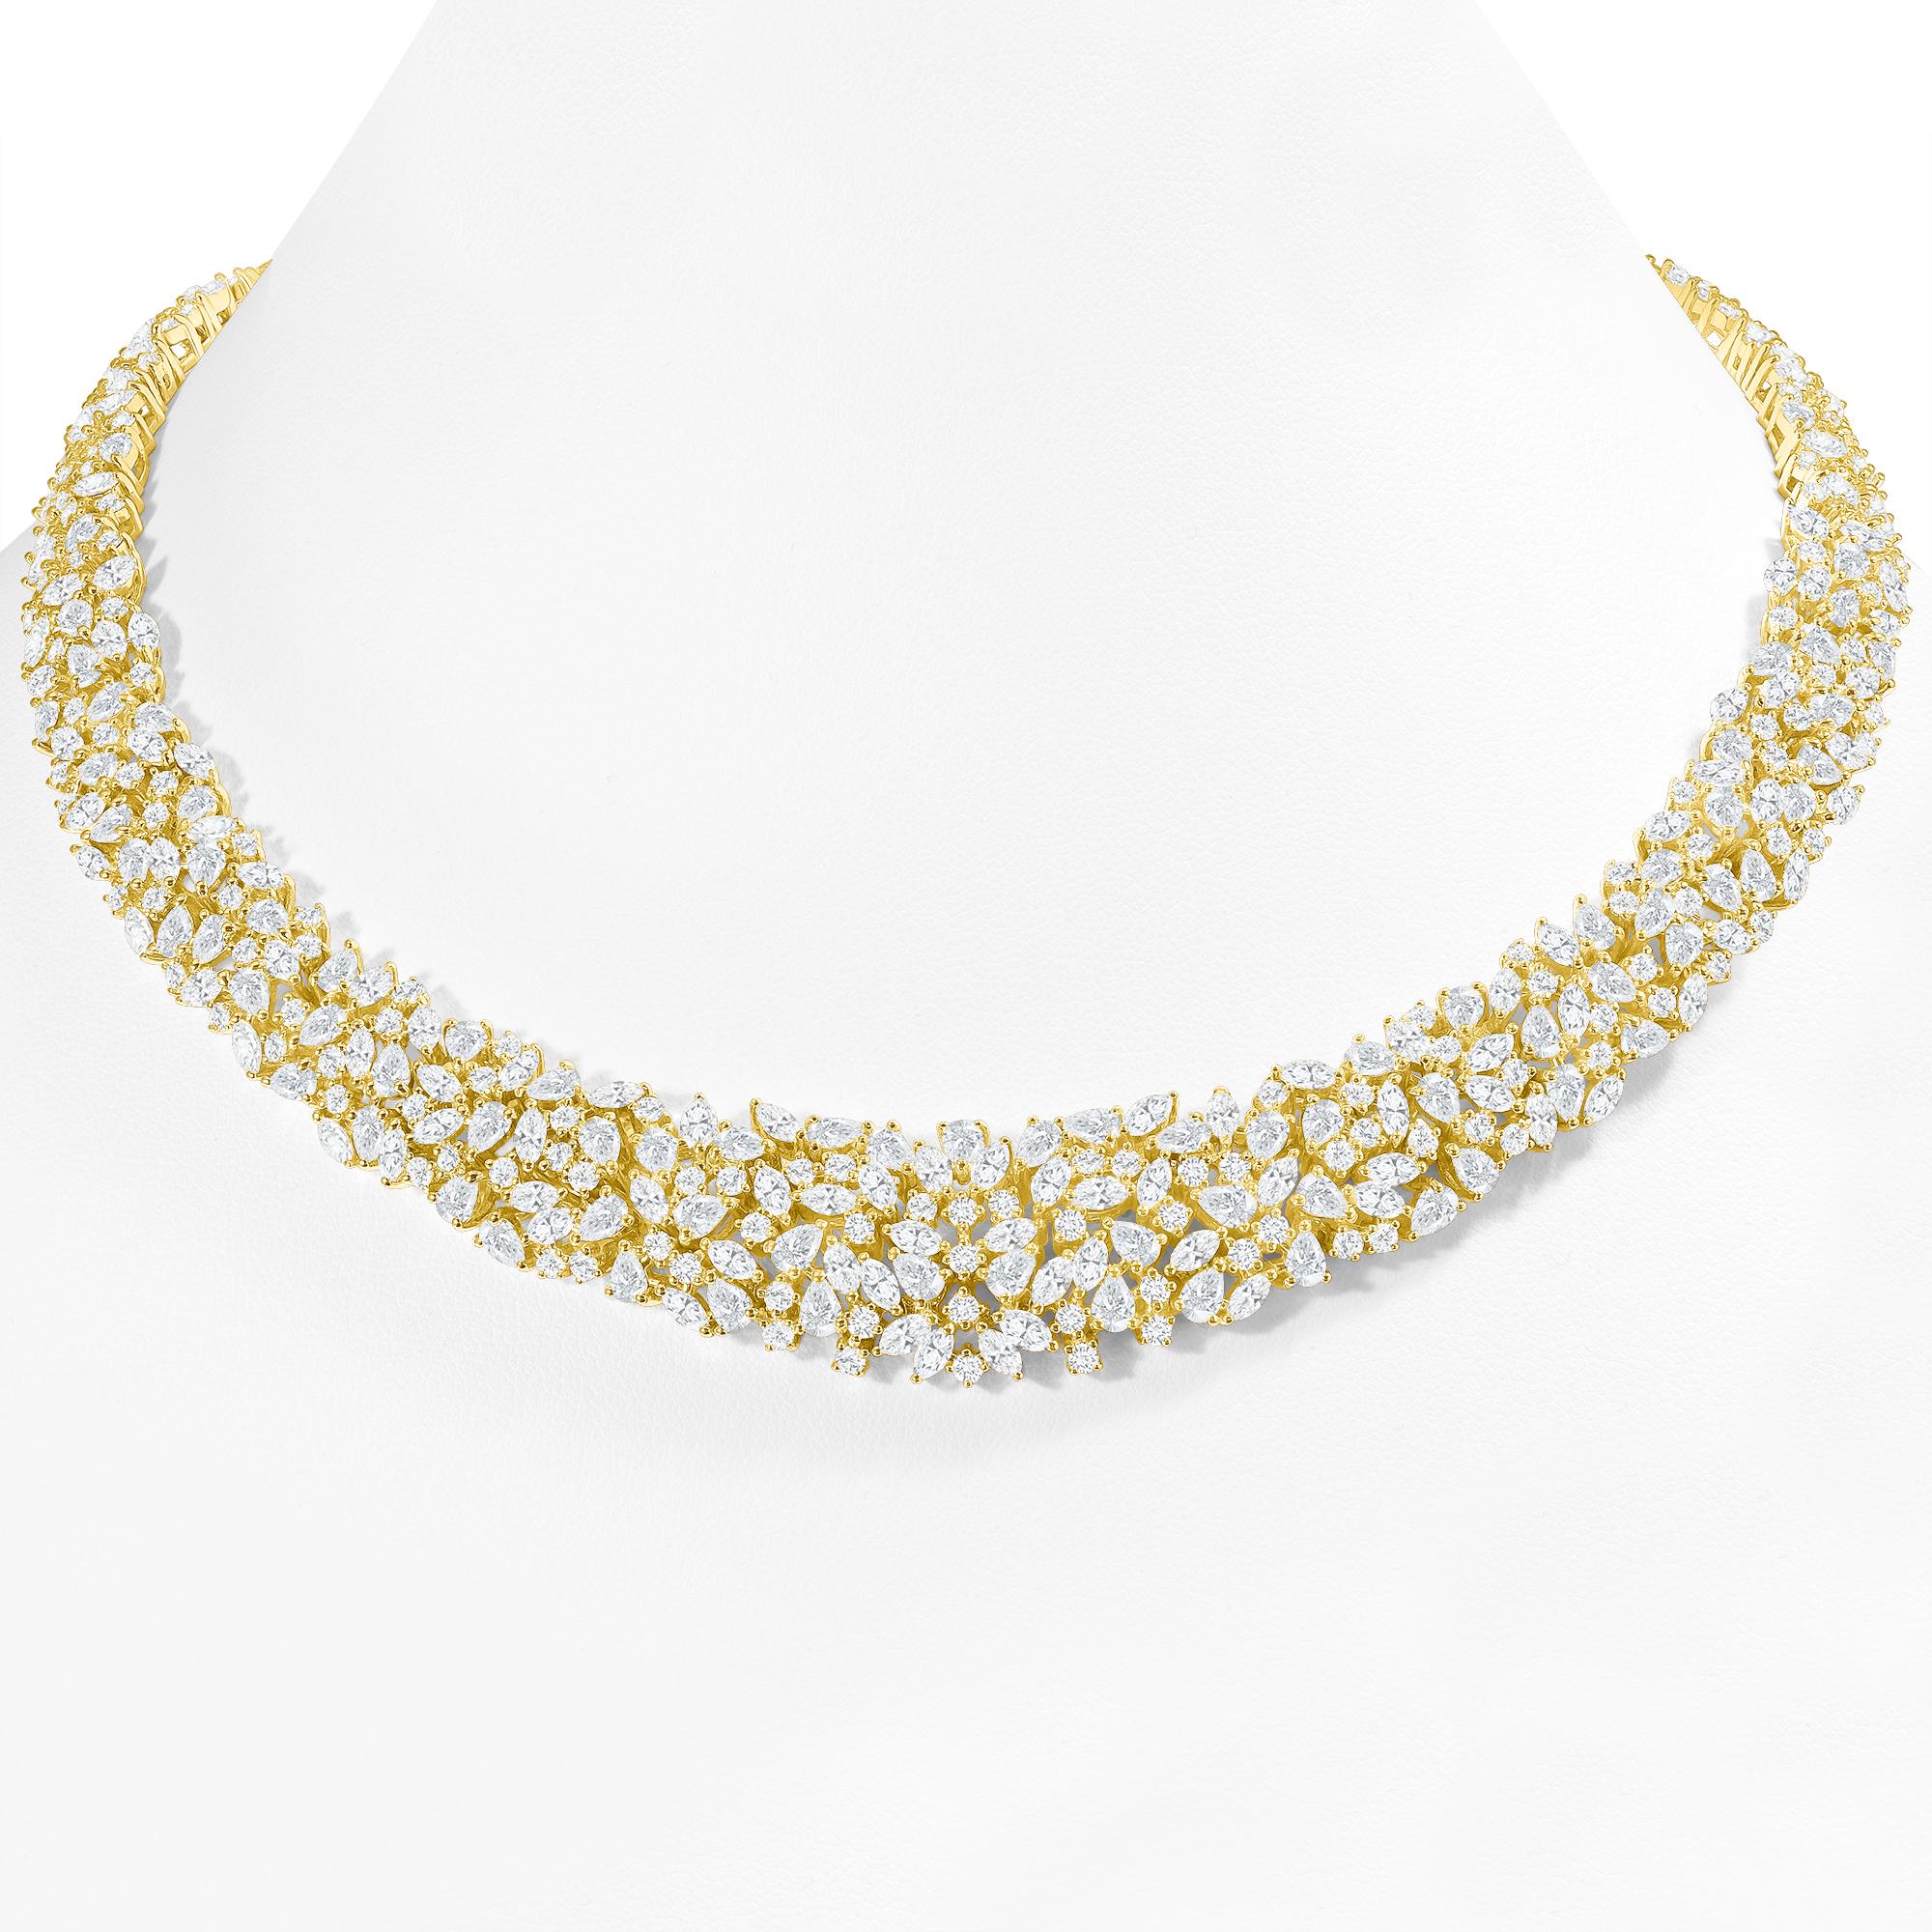 30 Carat Diamond Cluster Necklace, 18K Yellow Gold In New Condition For Sale In Los Angeles, CA